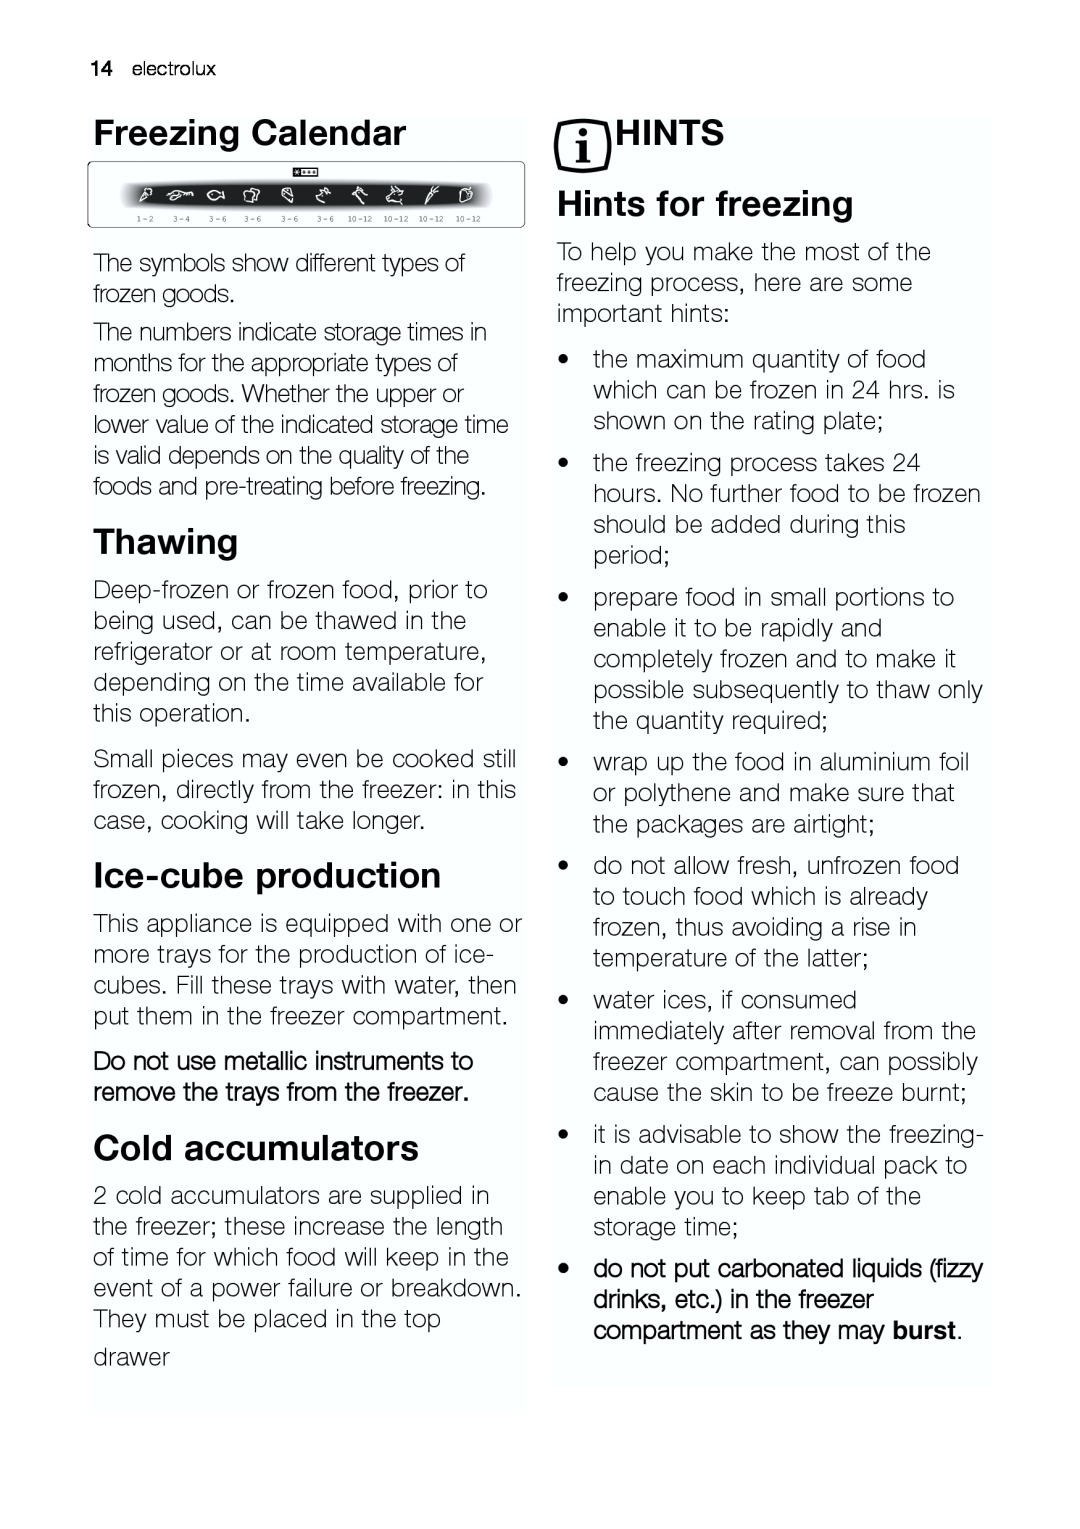 Electrolux EUF 27391 X manual Freezing Calendar, Thawing, Ice-cube production, Cold accumulators, HINTS Hints for freezing 